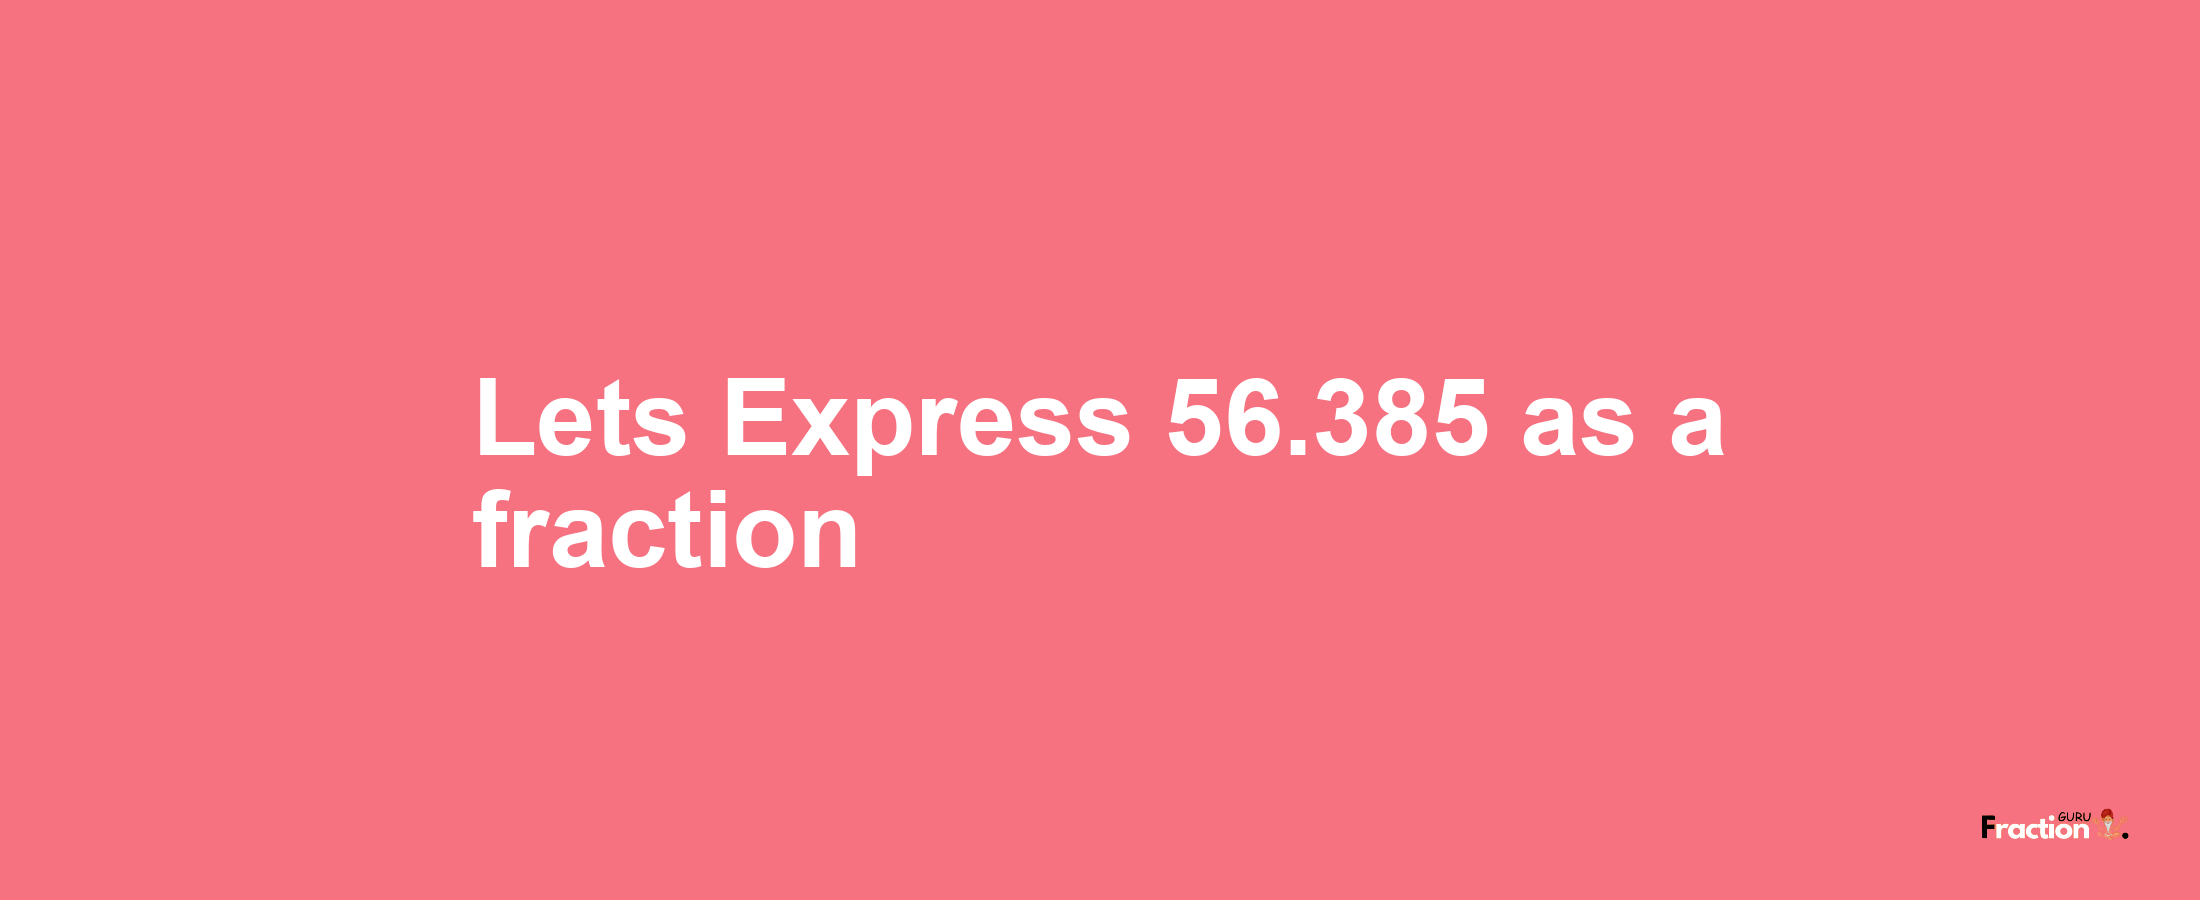 Lets Express 56.385 as afraction